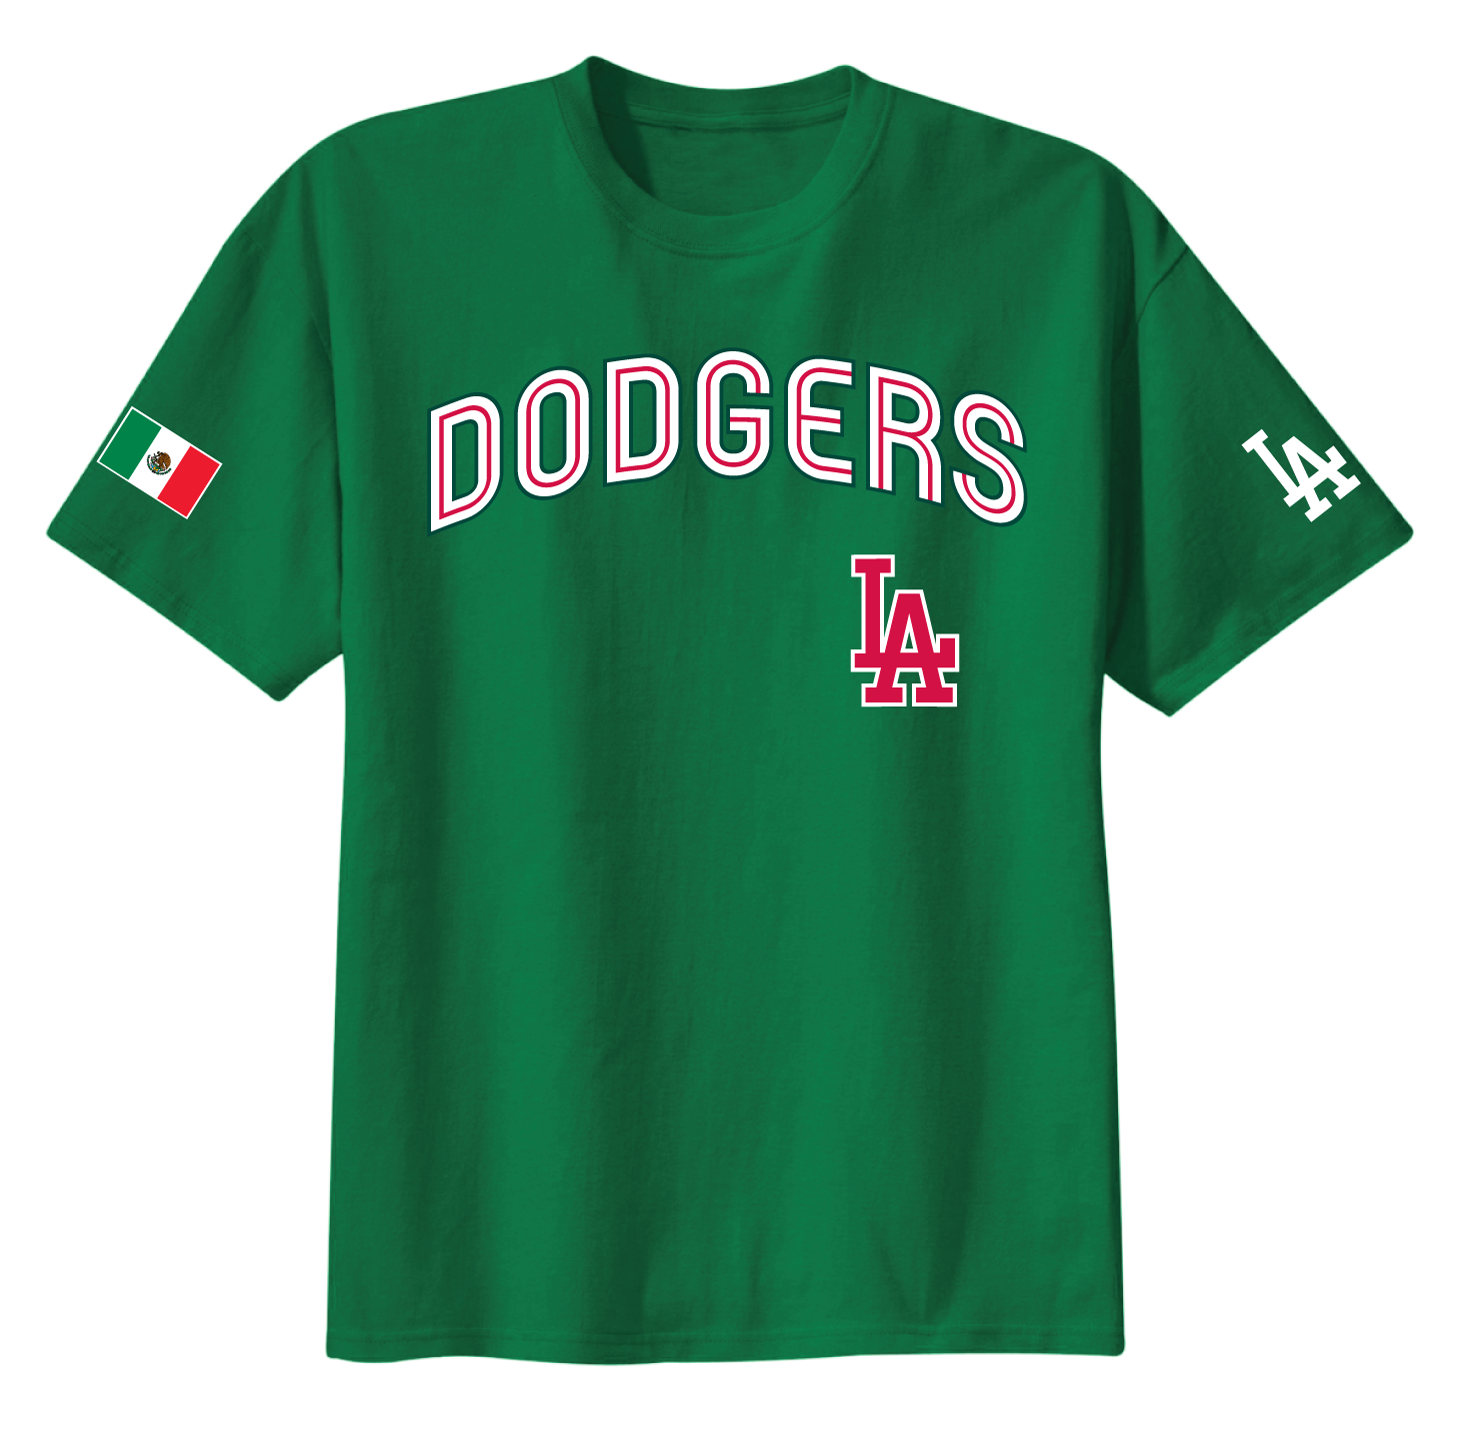 mexican dodgers jersey